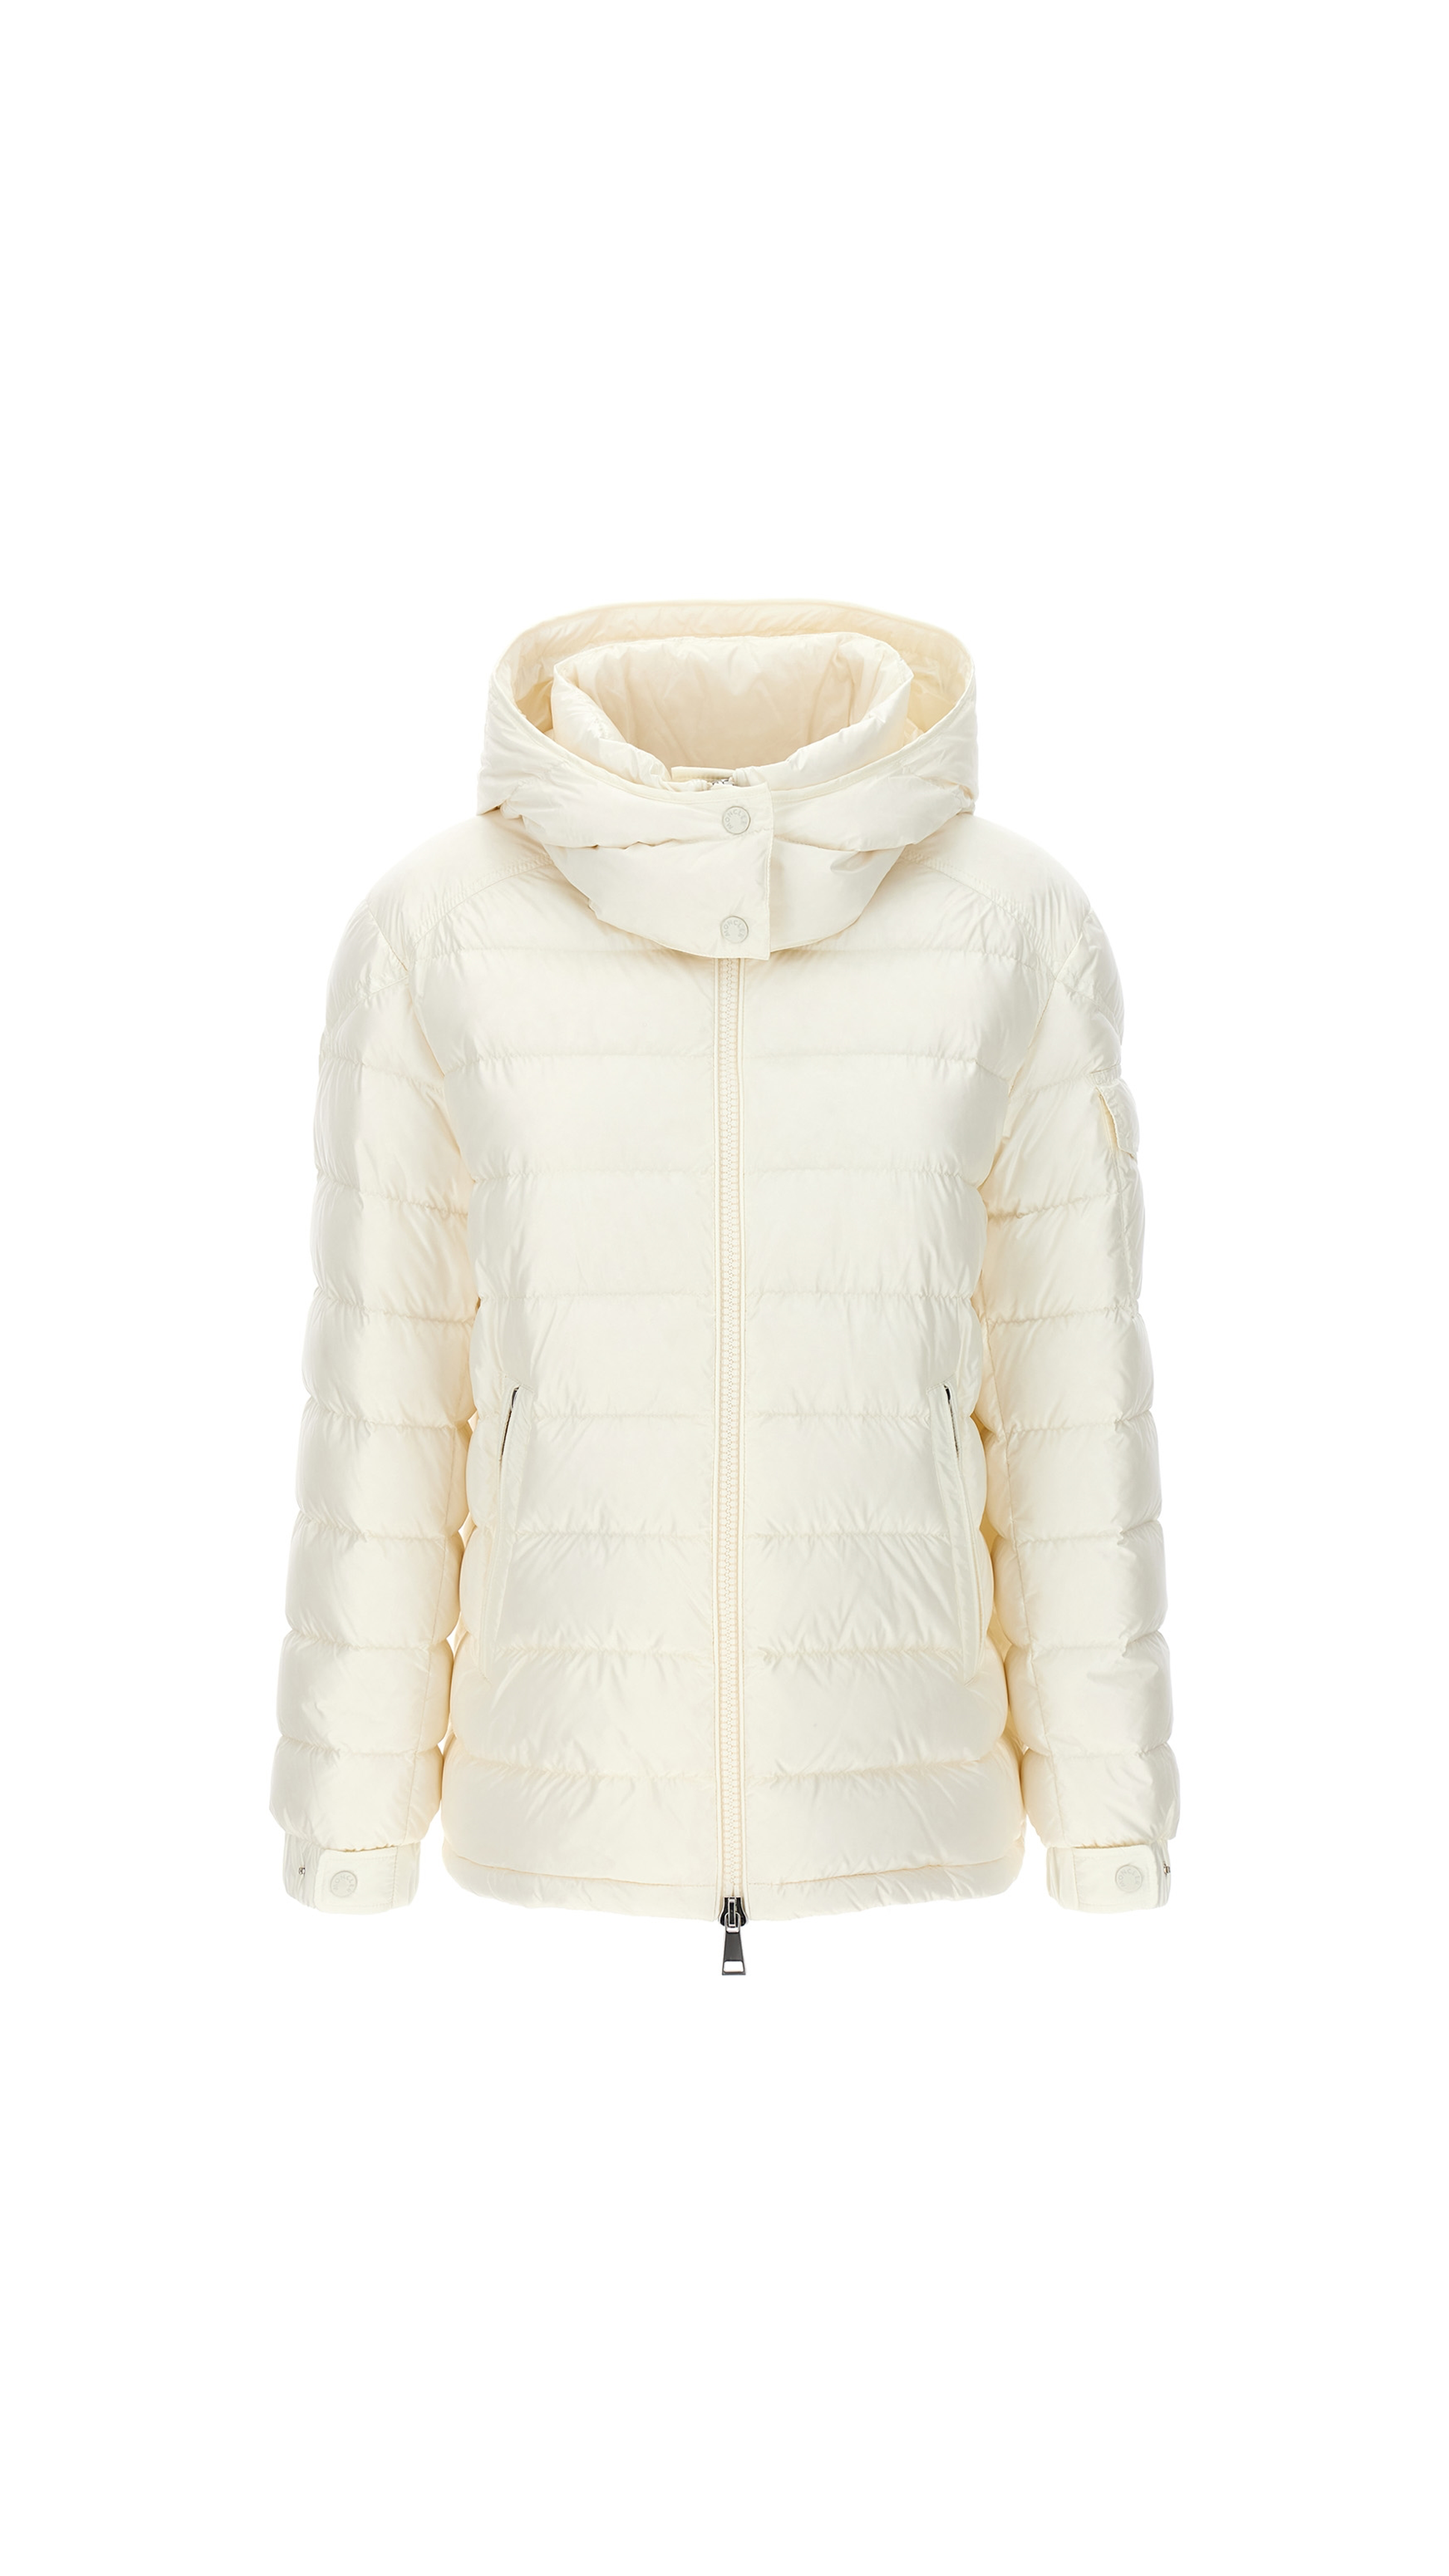 'Dalles' Down Jacket - Ivory